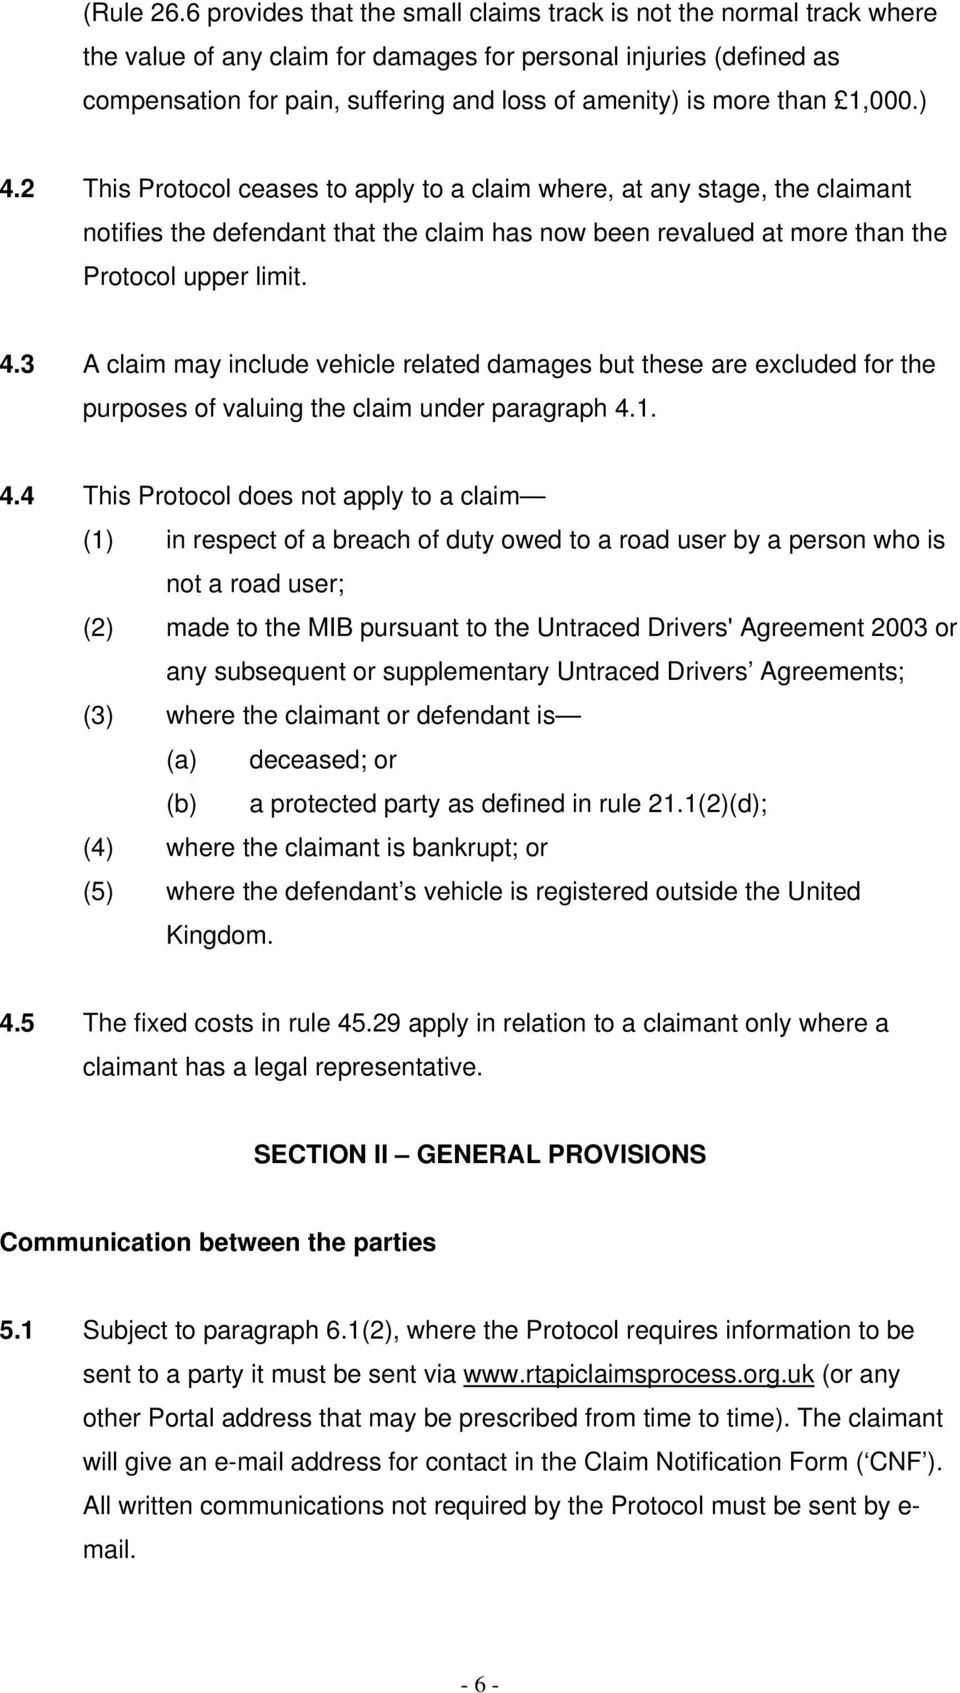 than 1,000.) 4.2 This Protocol ceases to apply to a claim where, at any stage, the claimant notifies the defendant that the claim has now been revalued at more than the Protocol upper limit. 4.3 A claim may include vehicle related damages but these are excluded for the purposes of valuing the claim under paragraph 4.